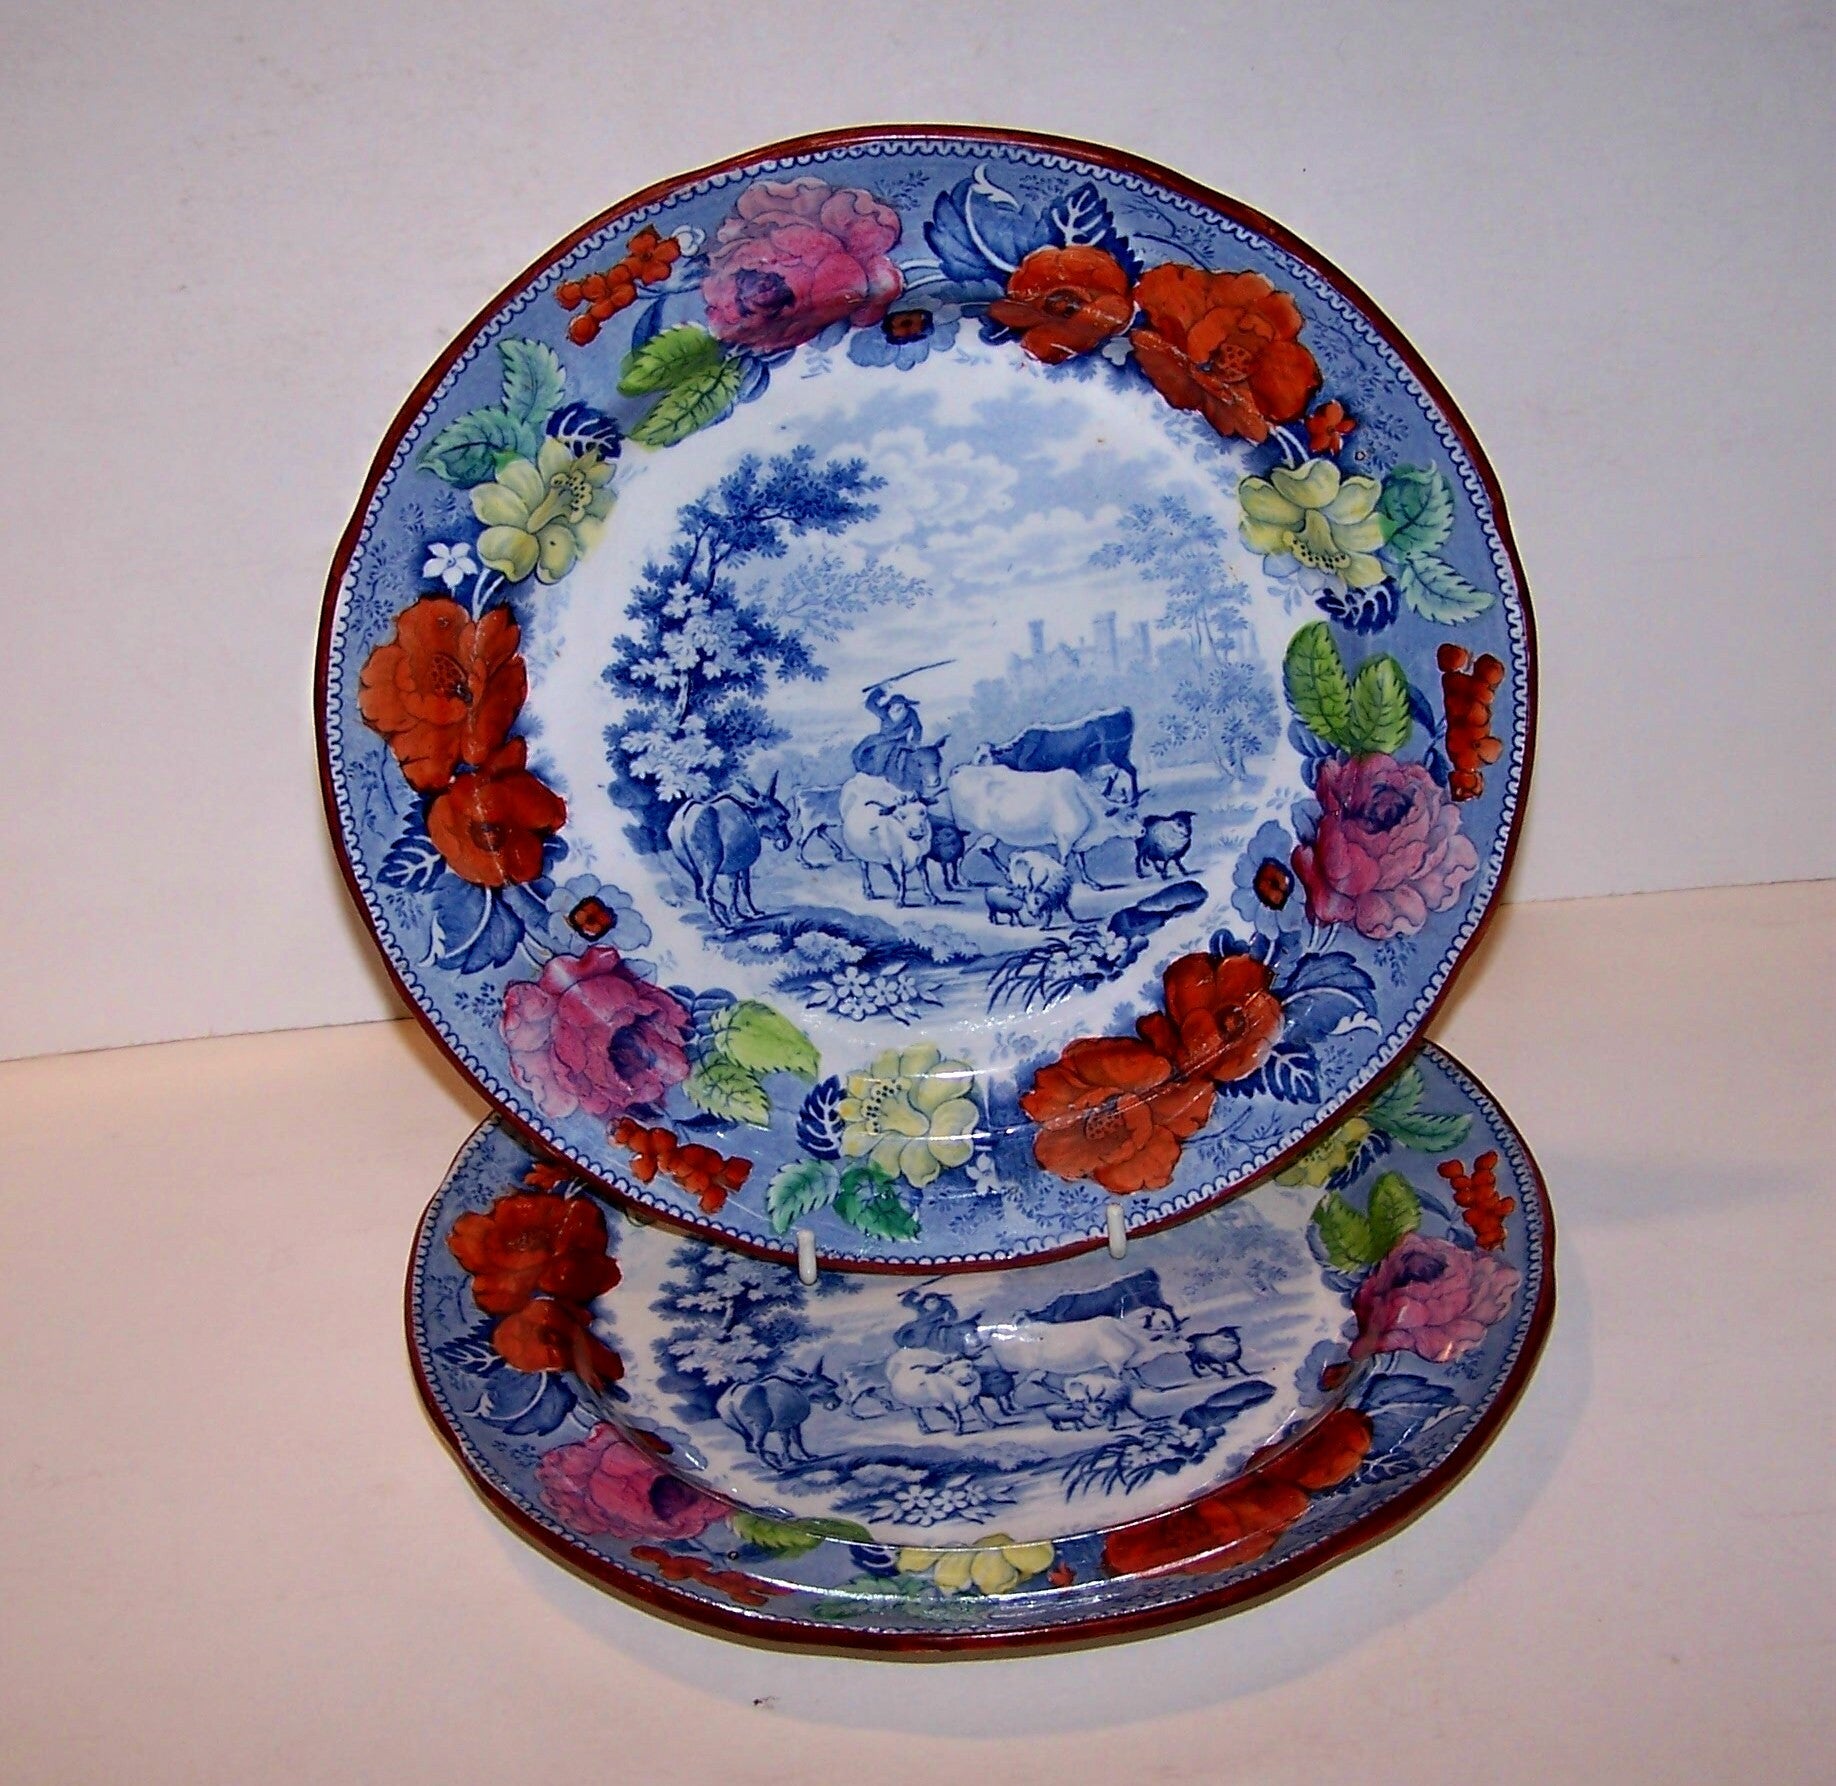 Set of Eleven Mason's Pearlware Dinner Dishes in the "Drover" Pattern